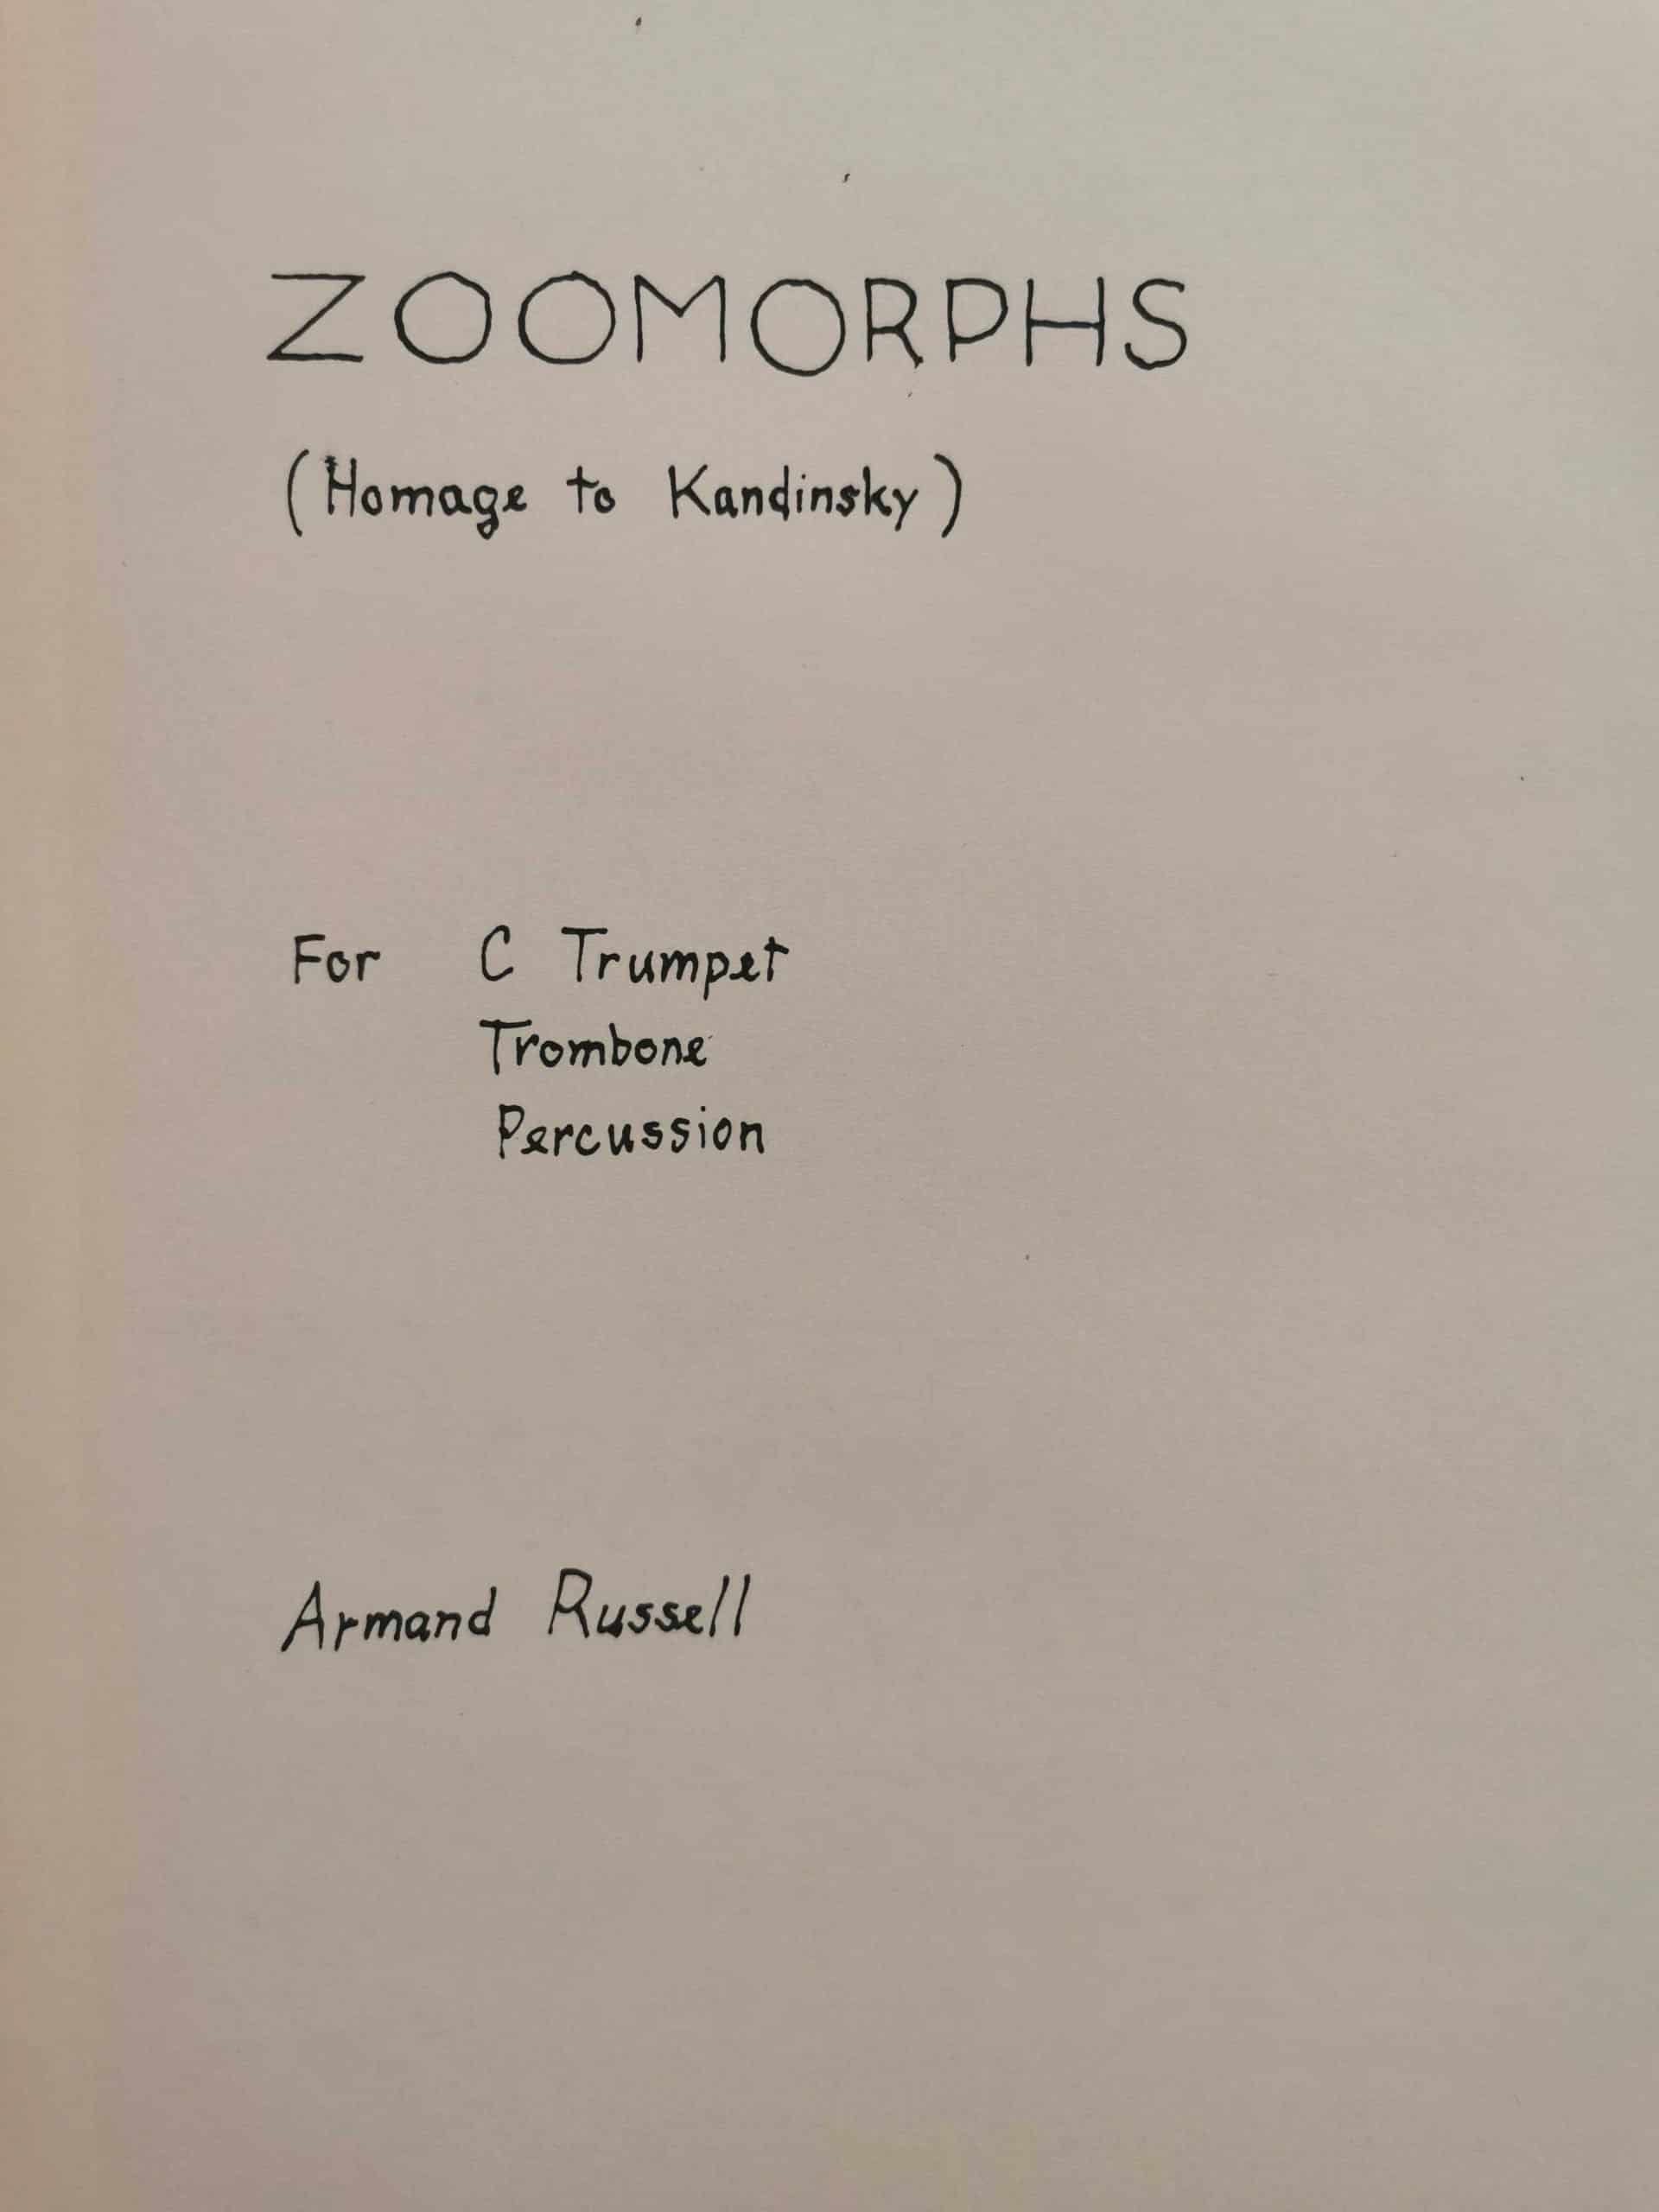 Zoomorphs - homage to Kandinsky by Armand Russell